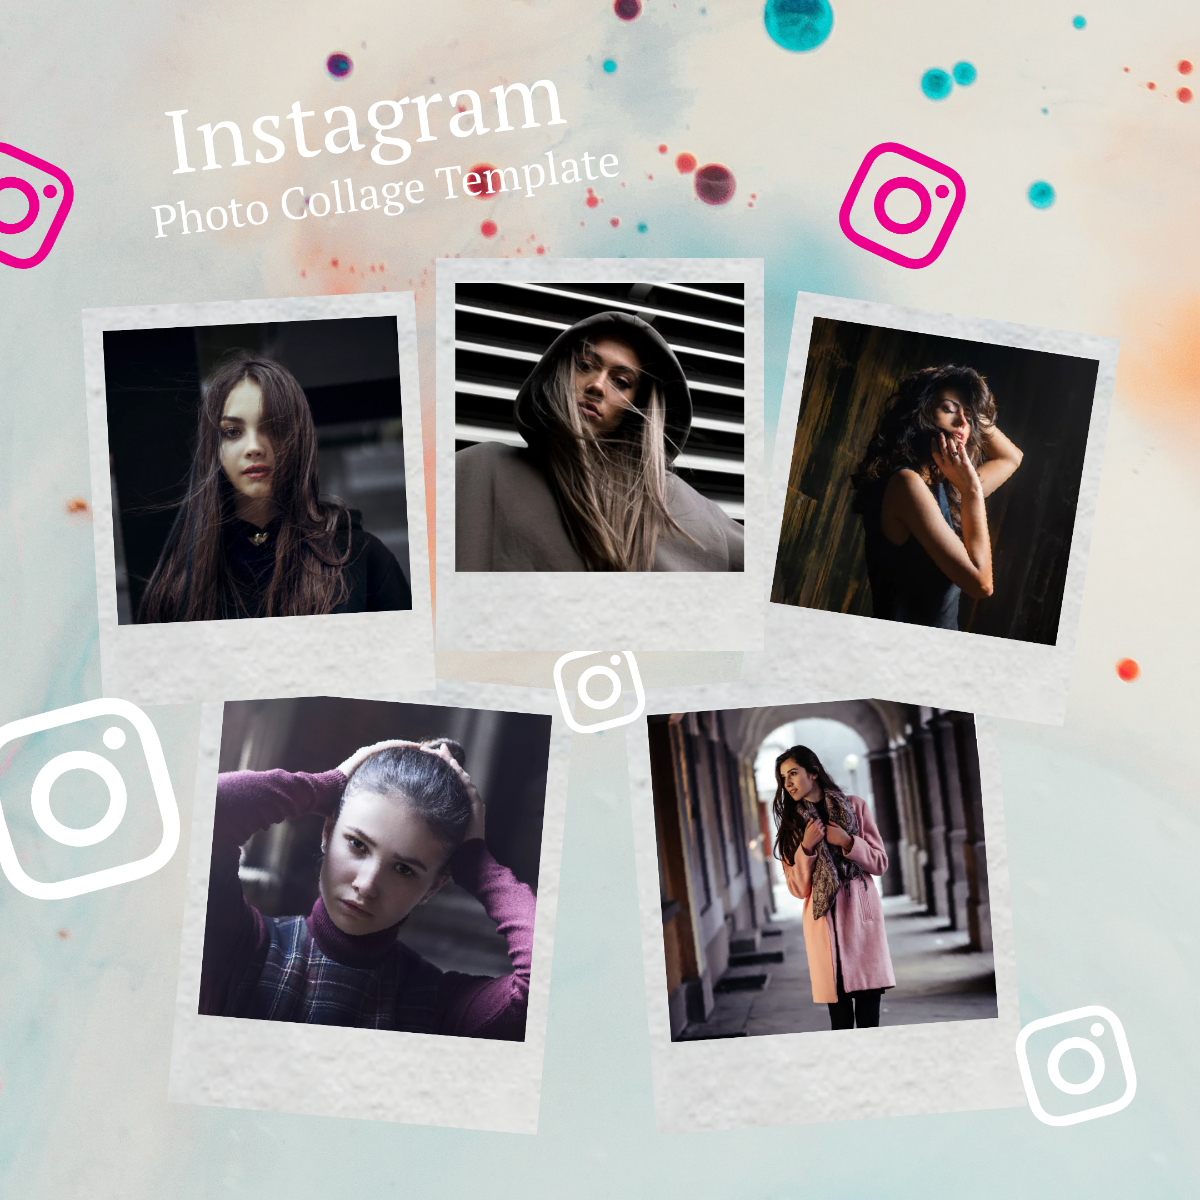 Instagram Photo Collage Template